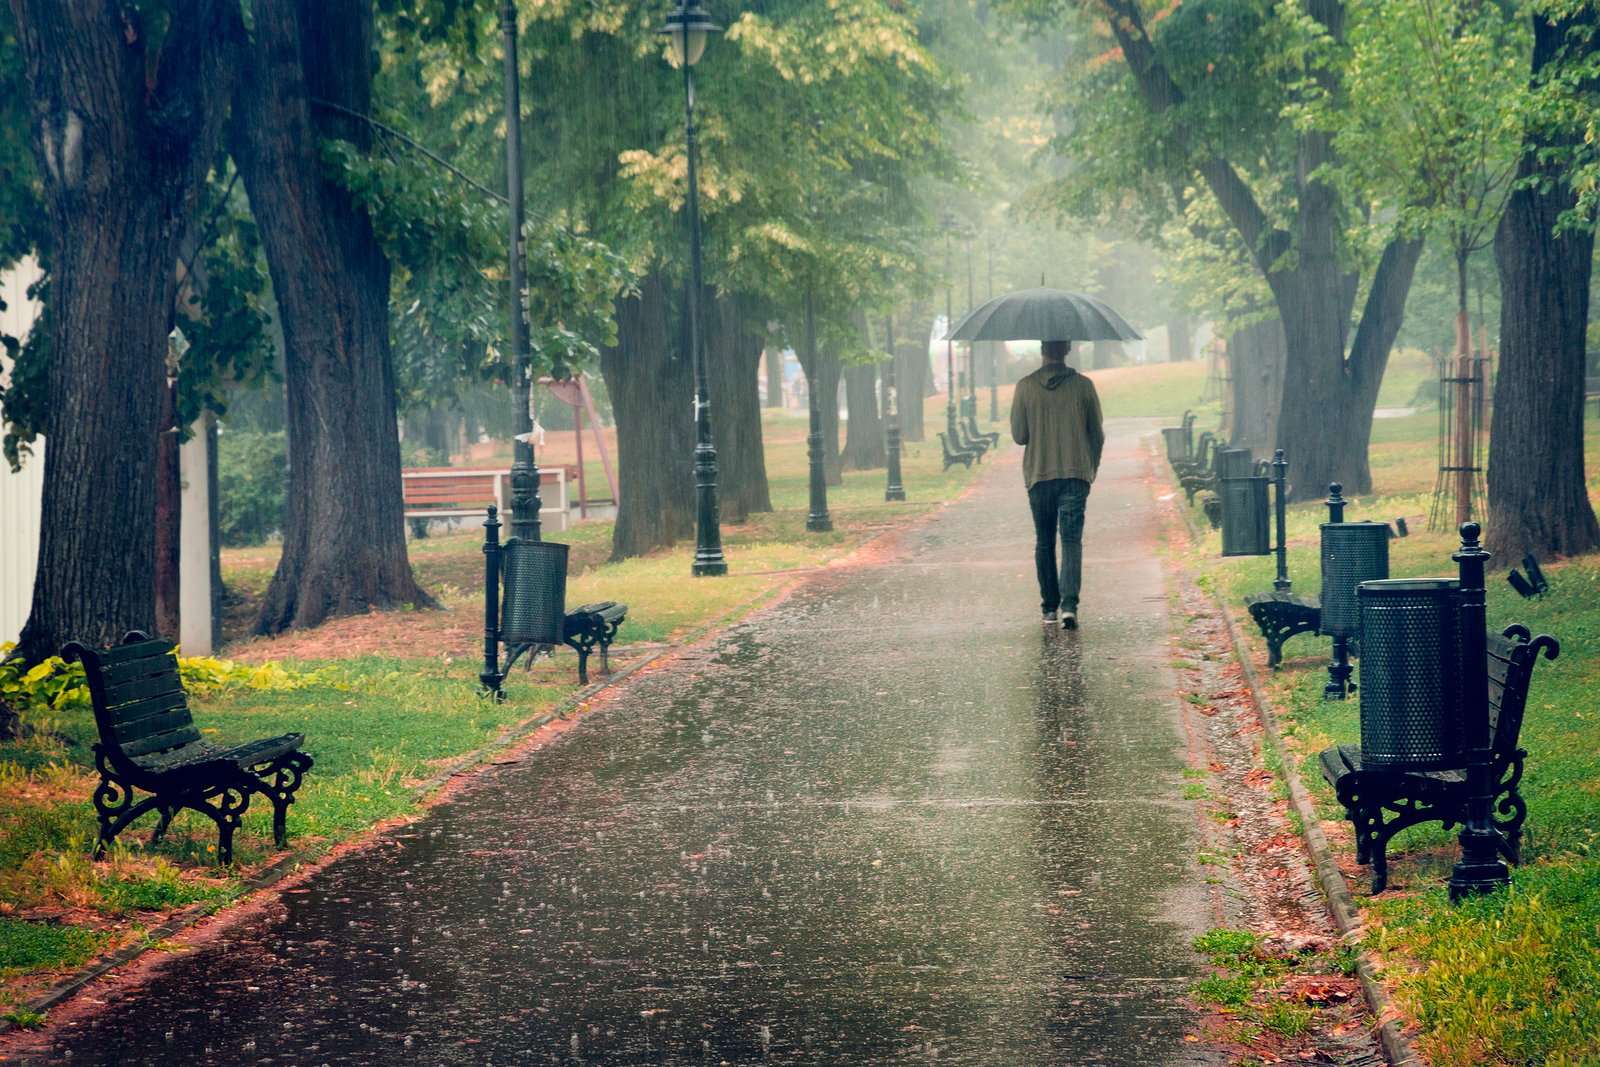 Rainy Day In The Park. Man Walking With Umbrella Under The Rain ...